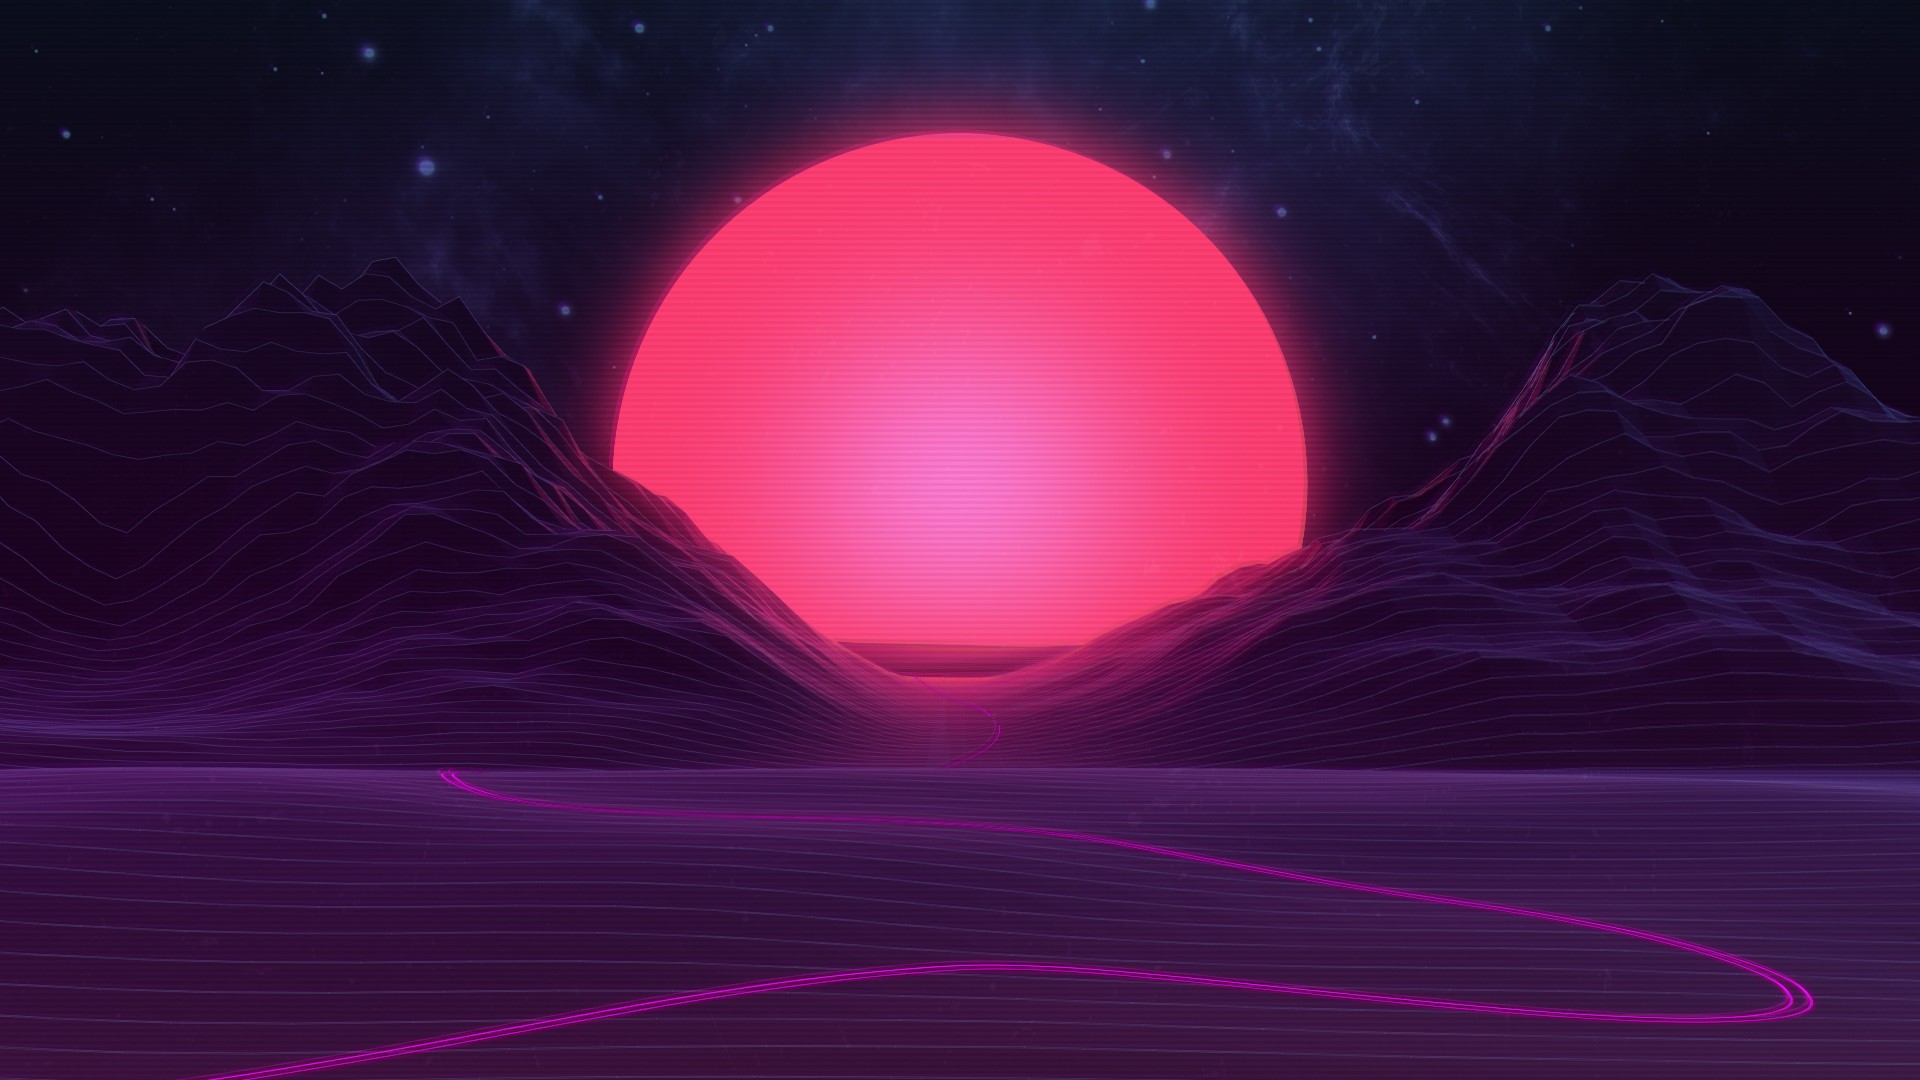 Vaporwave Wallpaper 1920x1080 Download Free Awesome Full Hd Images, Photos, Reviews